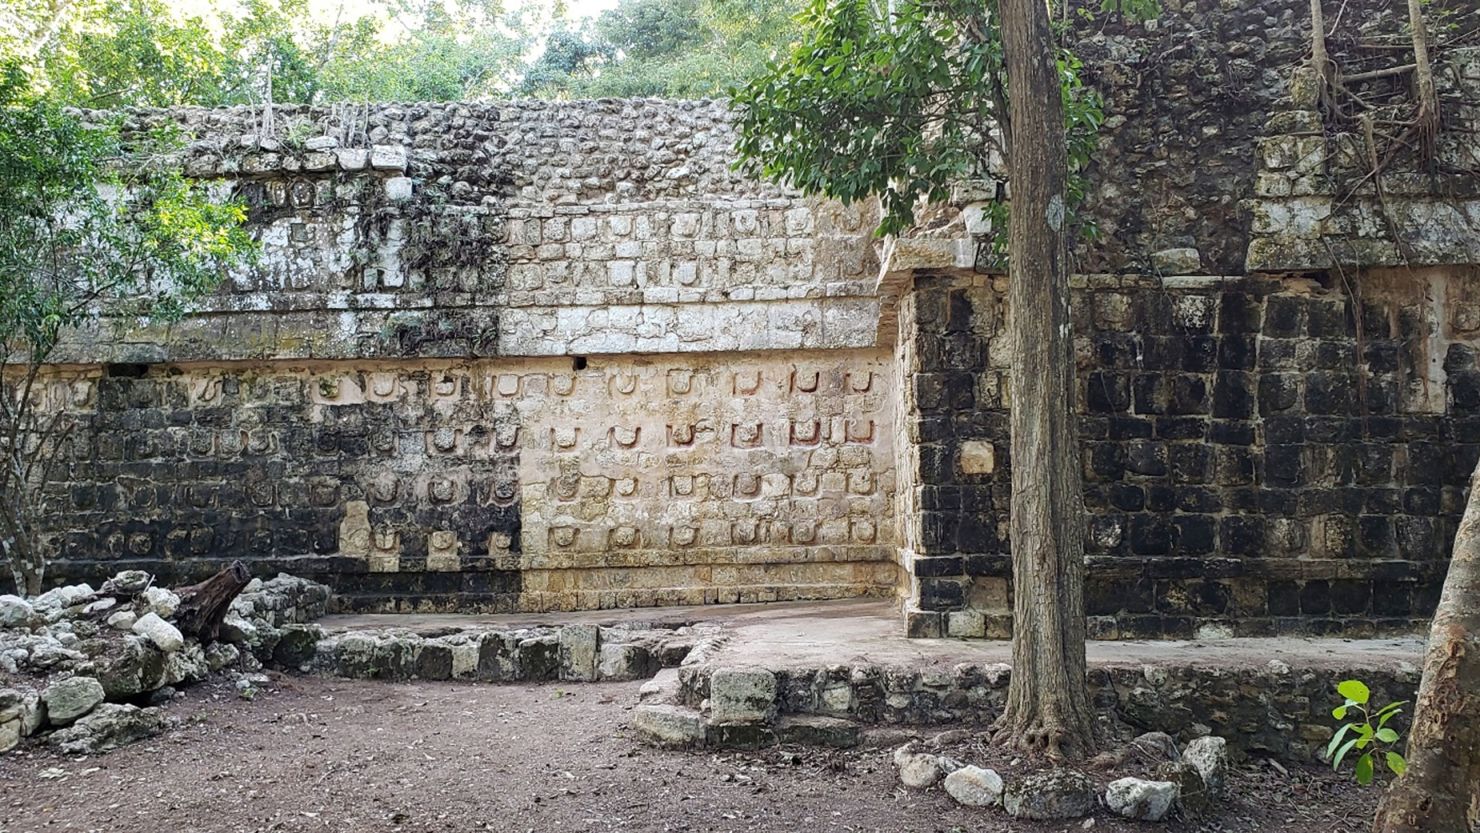 A  large palace, a temple and other structures were discovered in the Mexican state of Yucatan.